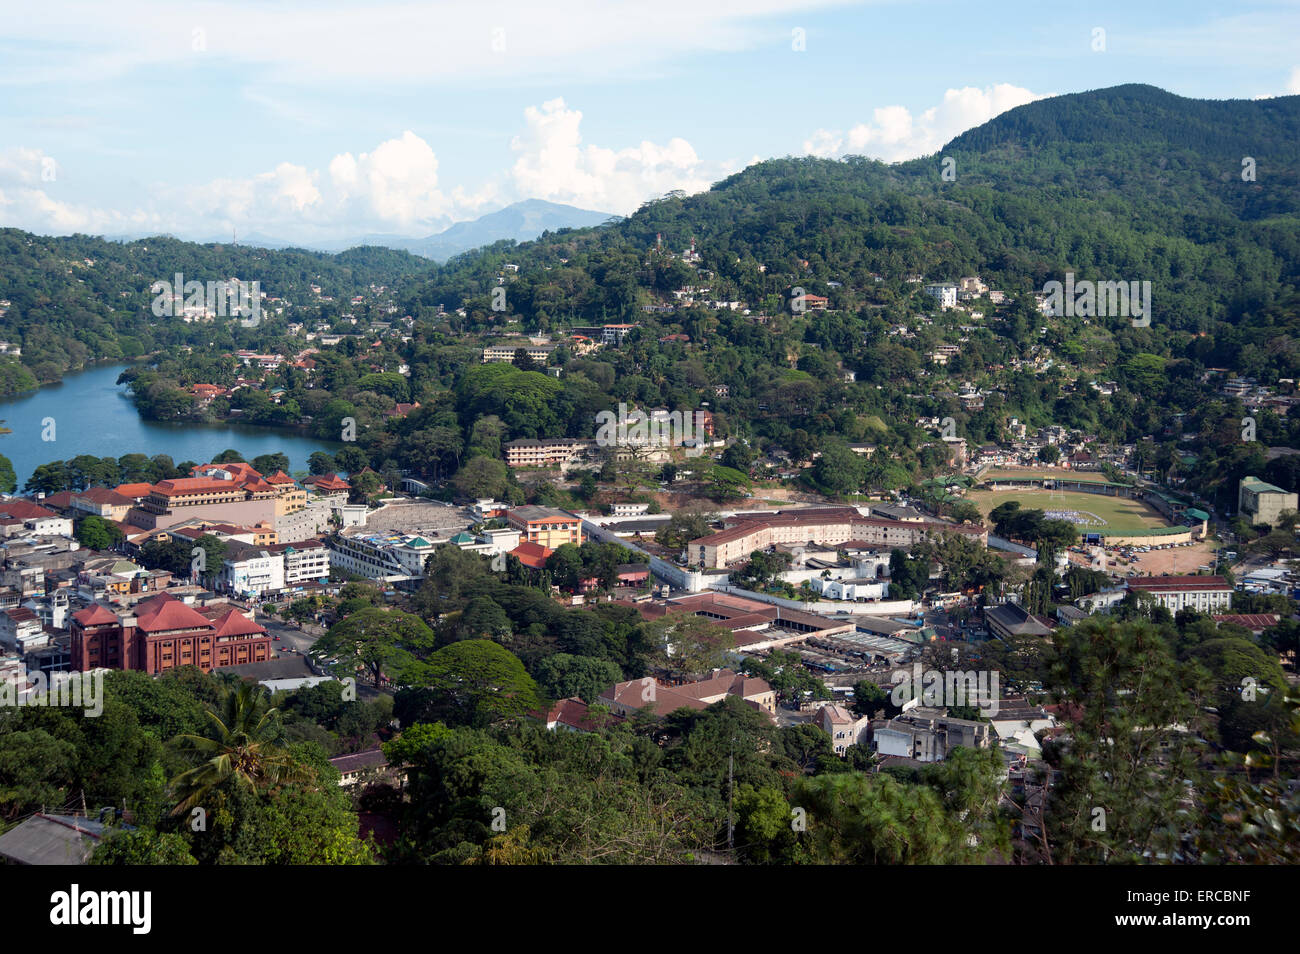 A view looking down on the city of Kandy including the cricket pitch from the surrounding hills in Sri Lanka Stock Photo